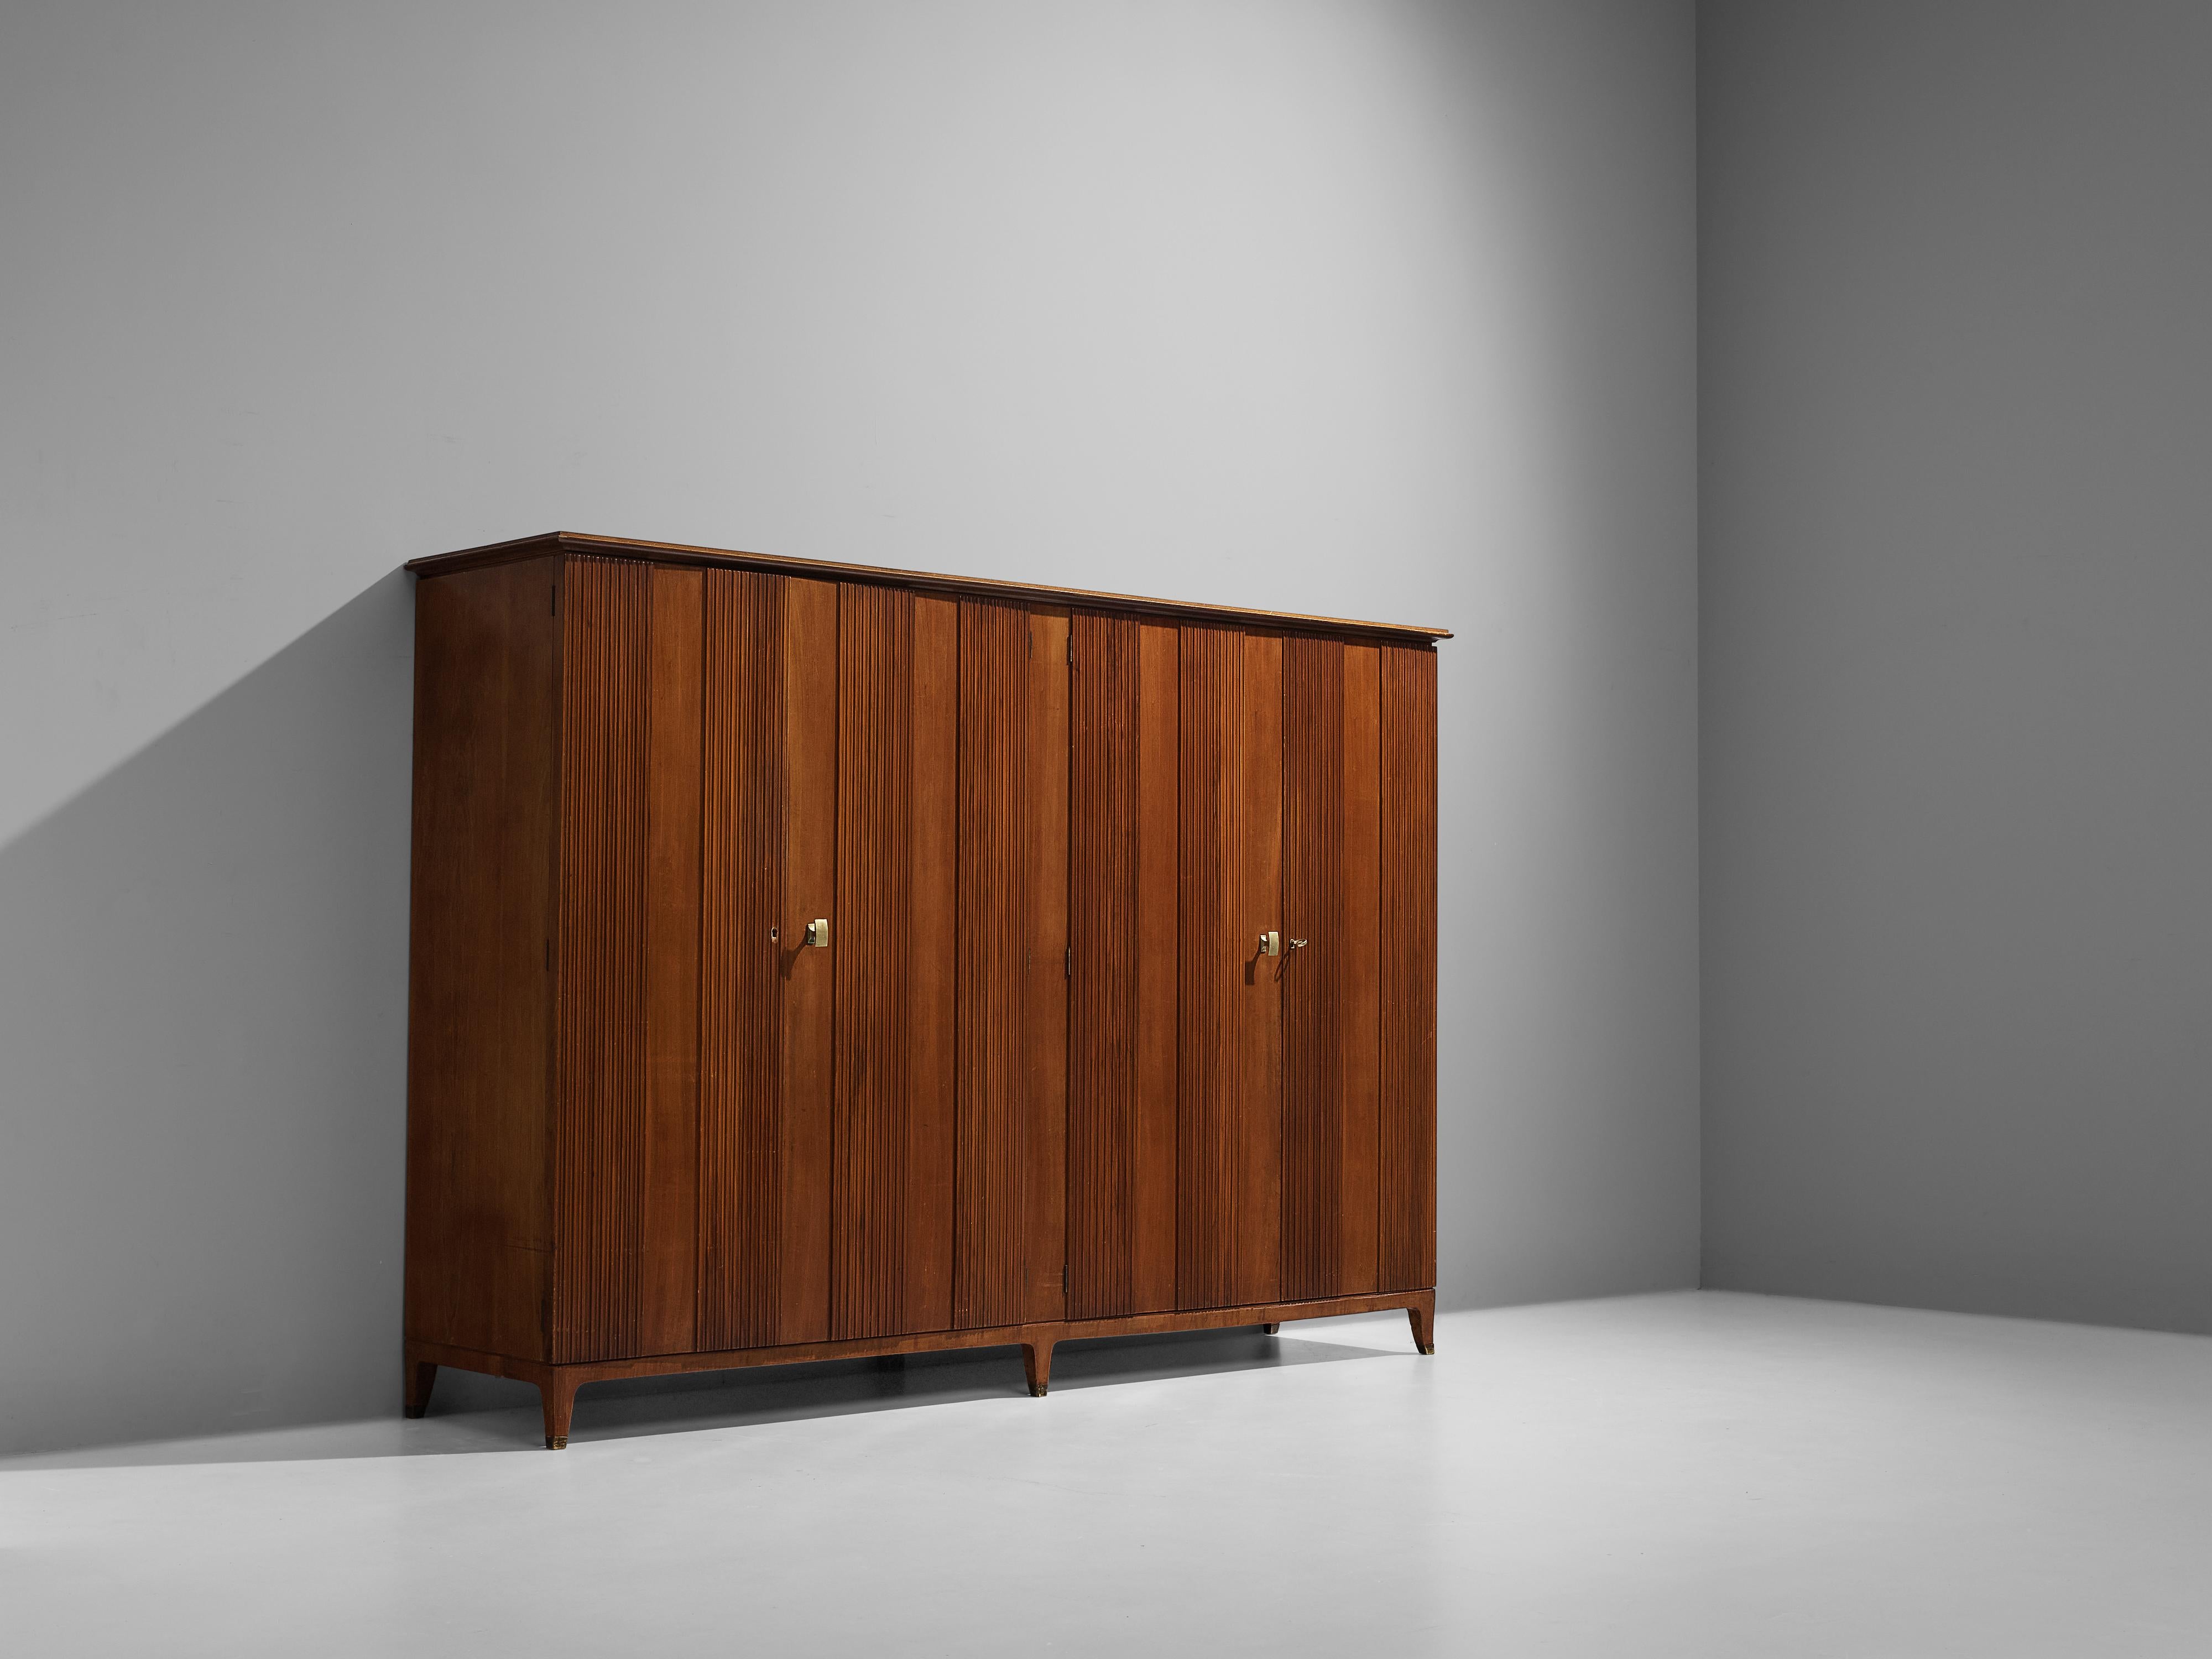 Paolo Buffa, wardrobe, walnut, ashwood and brass, Italy, 1950s

This grand wardrobe is executed in warm Italian walnut with brass details. The doors are finished with vertical wooden slates that run from the bottom all the way to the top, creating a